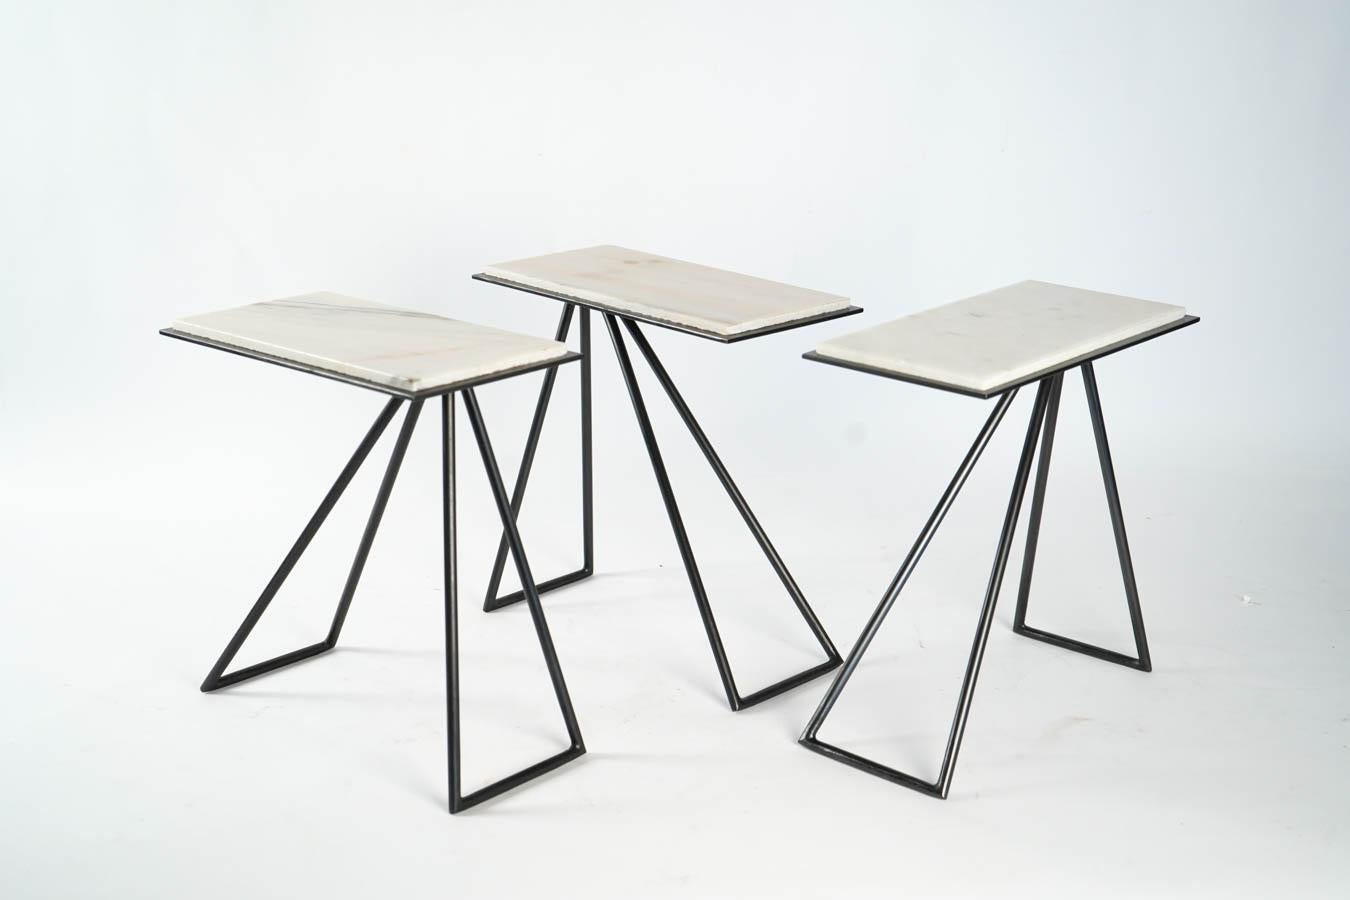 Modular Contemporary Design Coffee Tables by Anouchka Potdevin In Good Condition For Sale In Saint-Ouen, FR